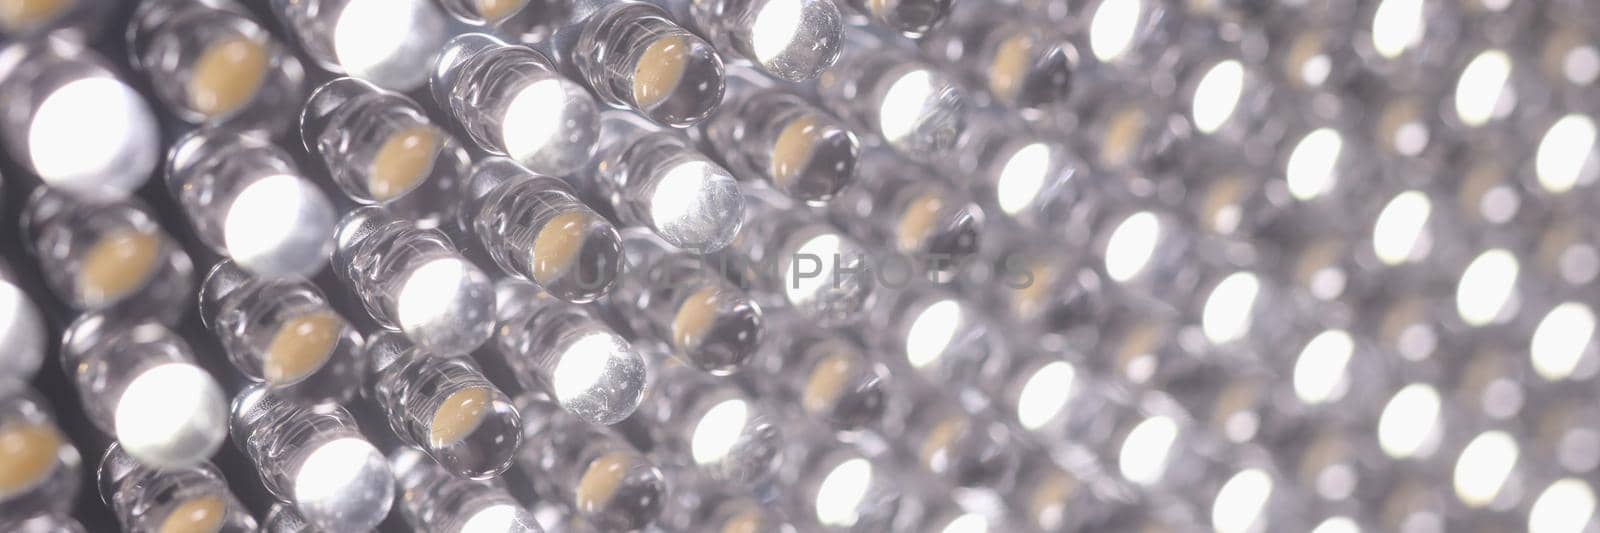 Closeup of lots of bright leds in lamp background by kuprevich